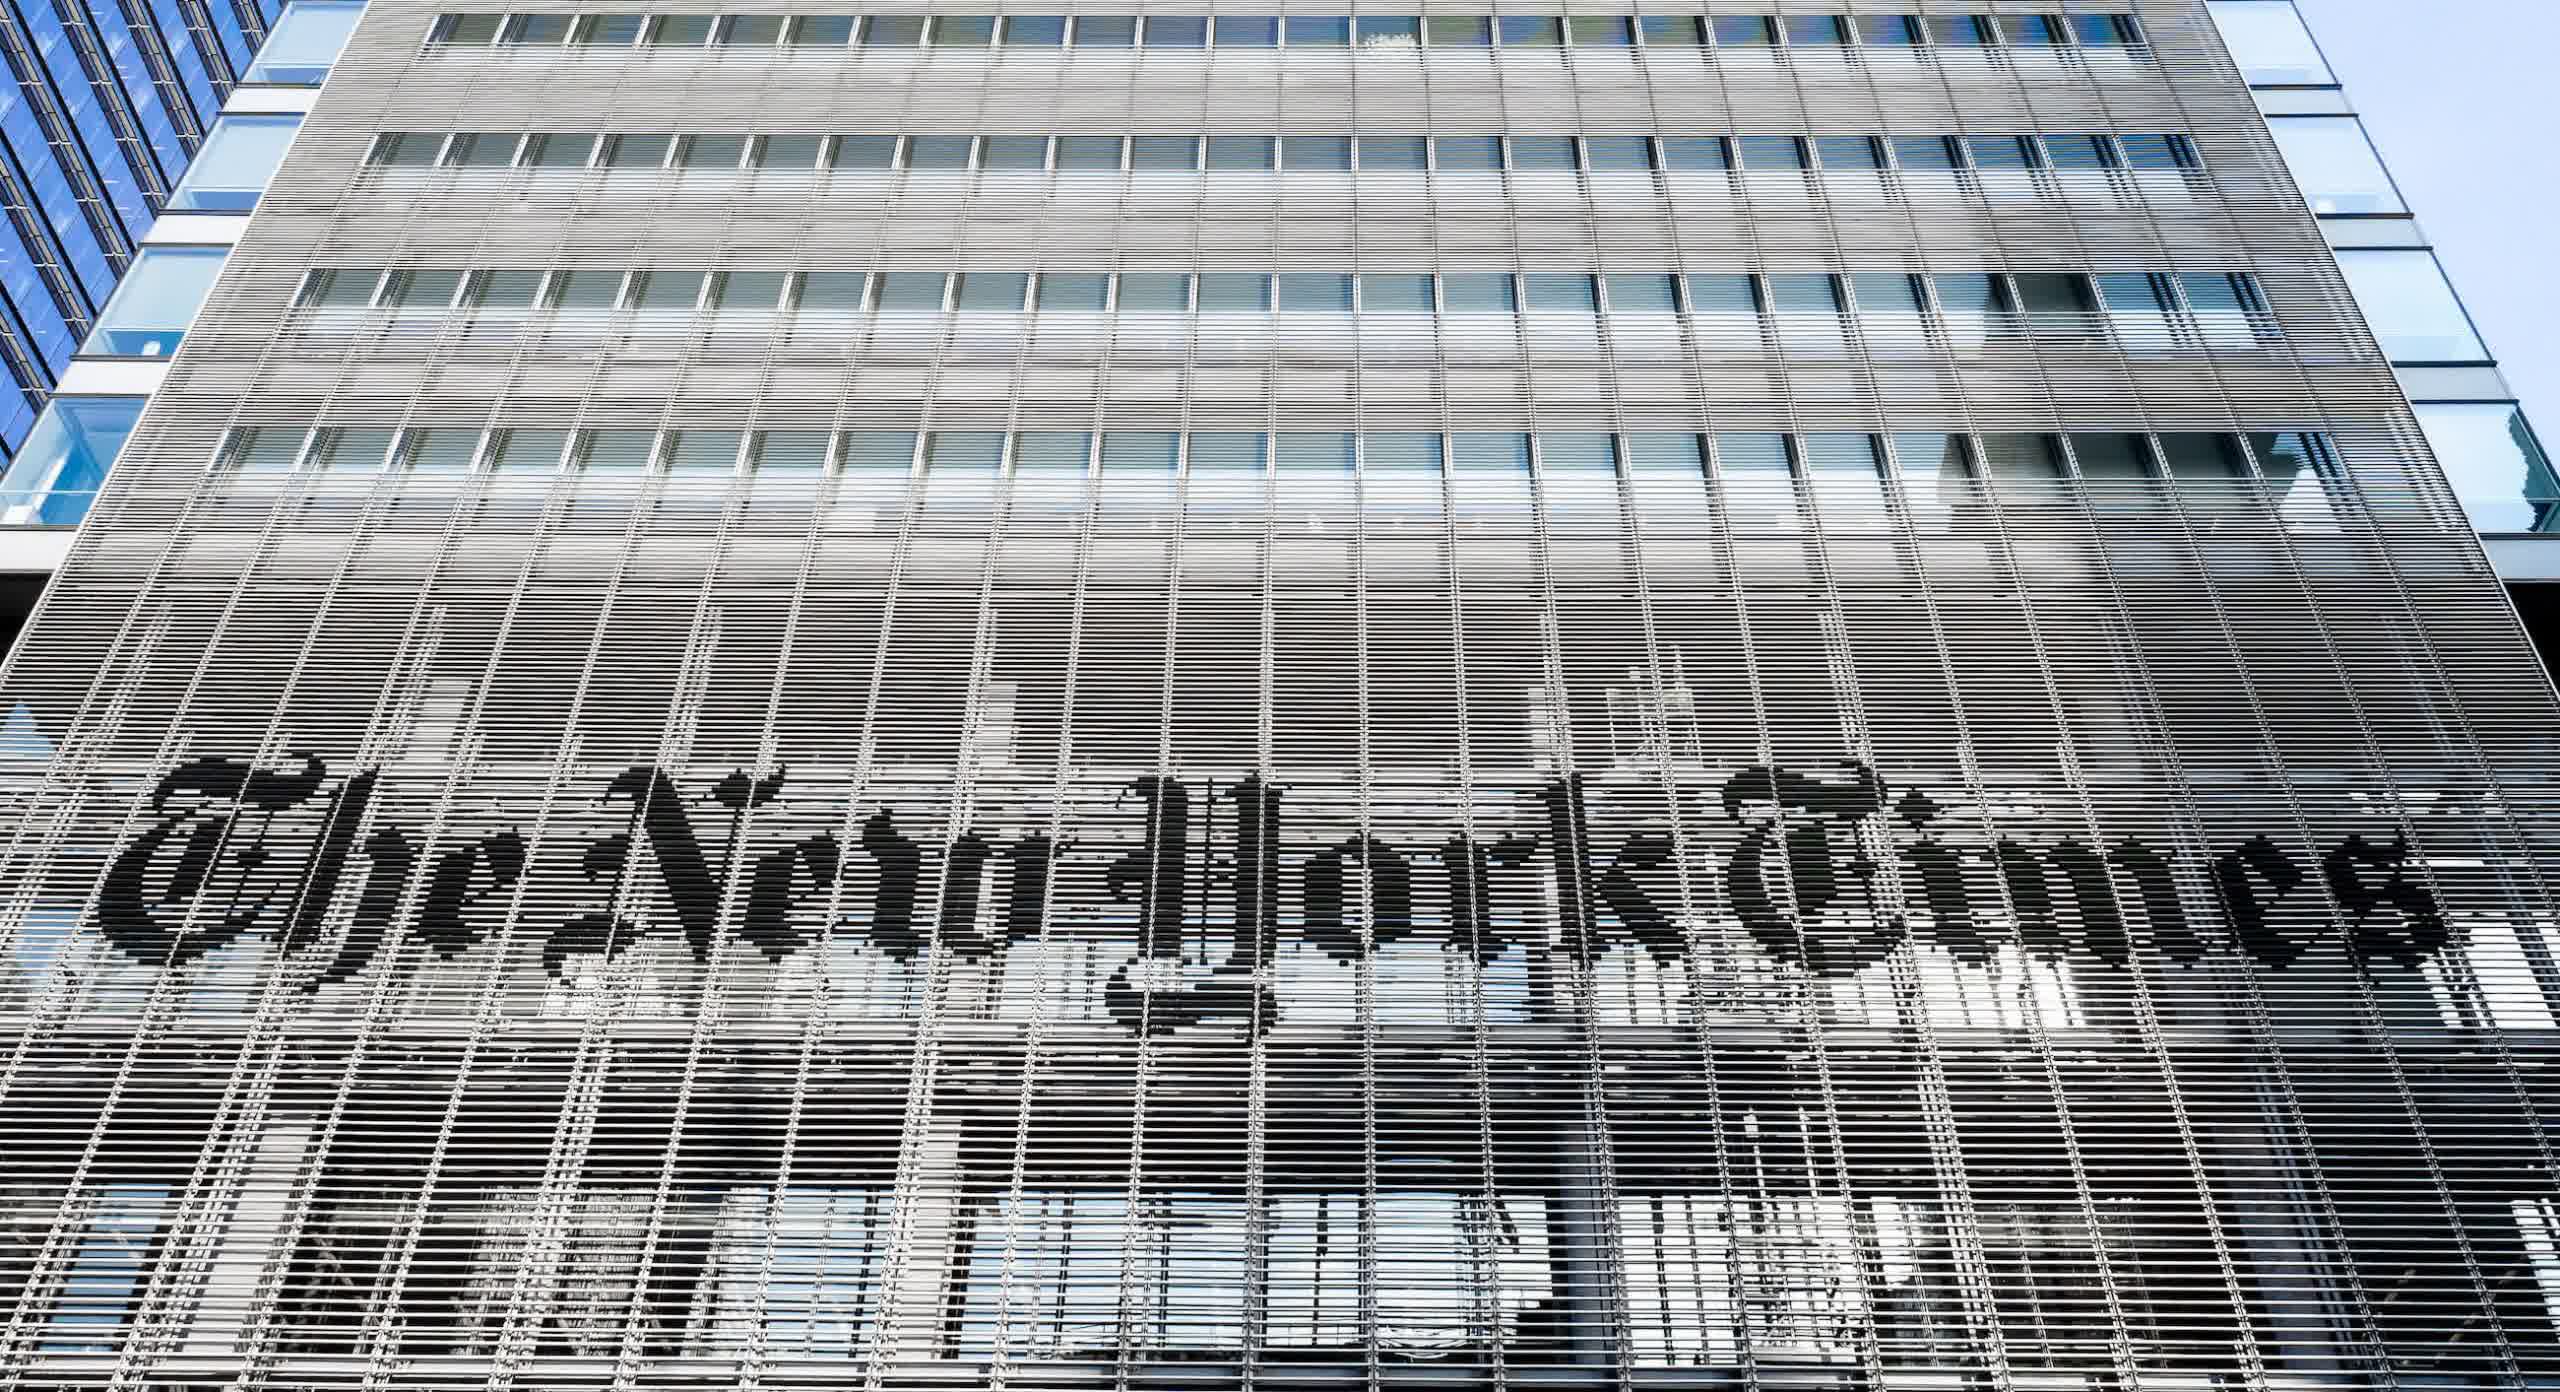 New York Times pulls potentially controversial Wordle answer due to recent events